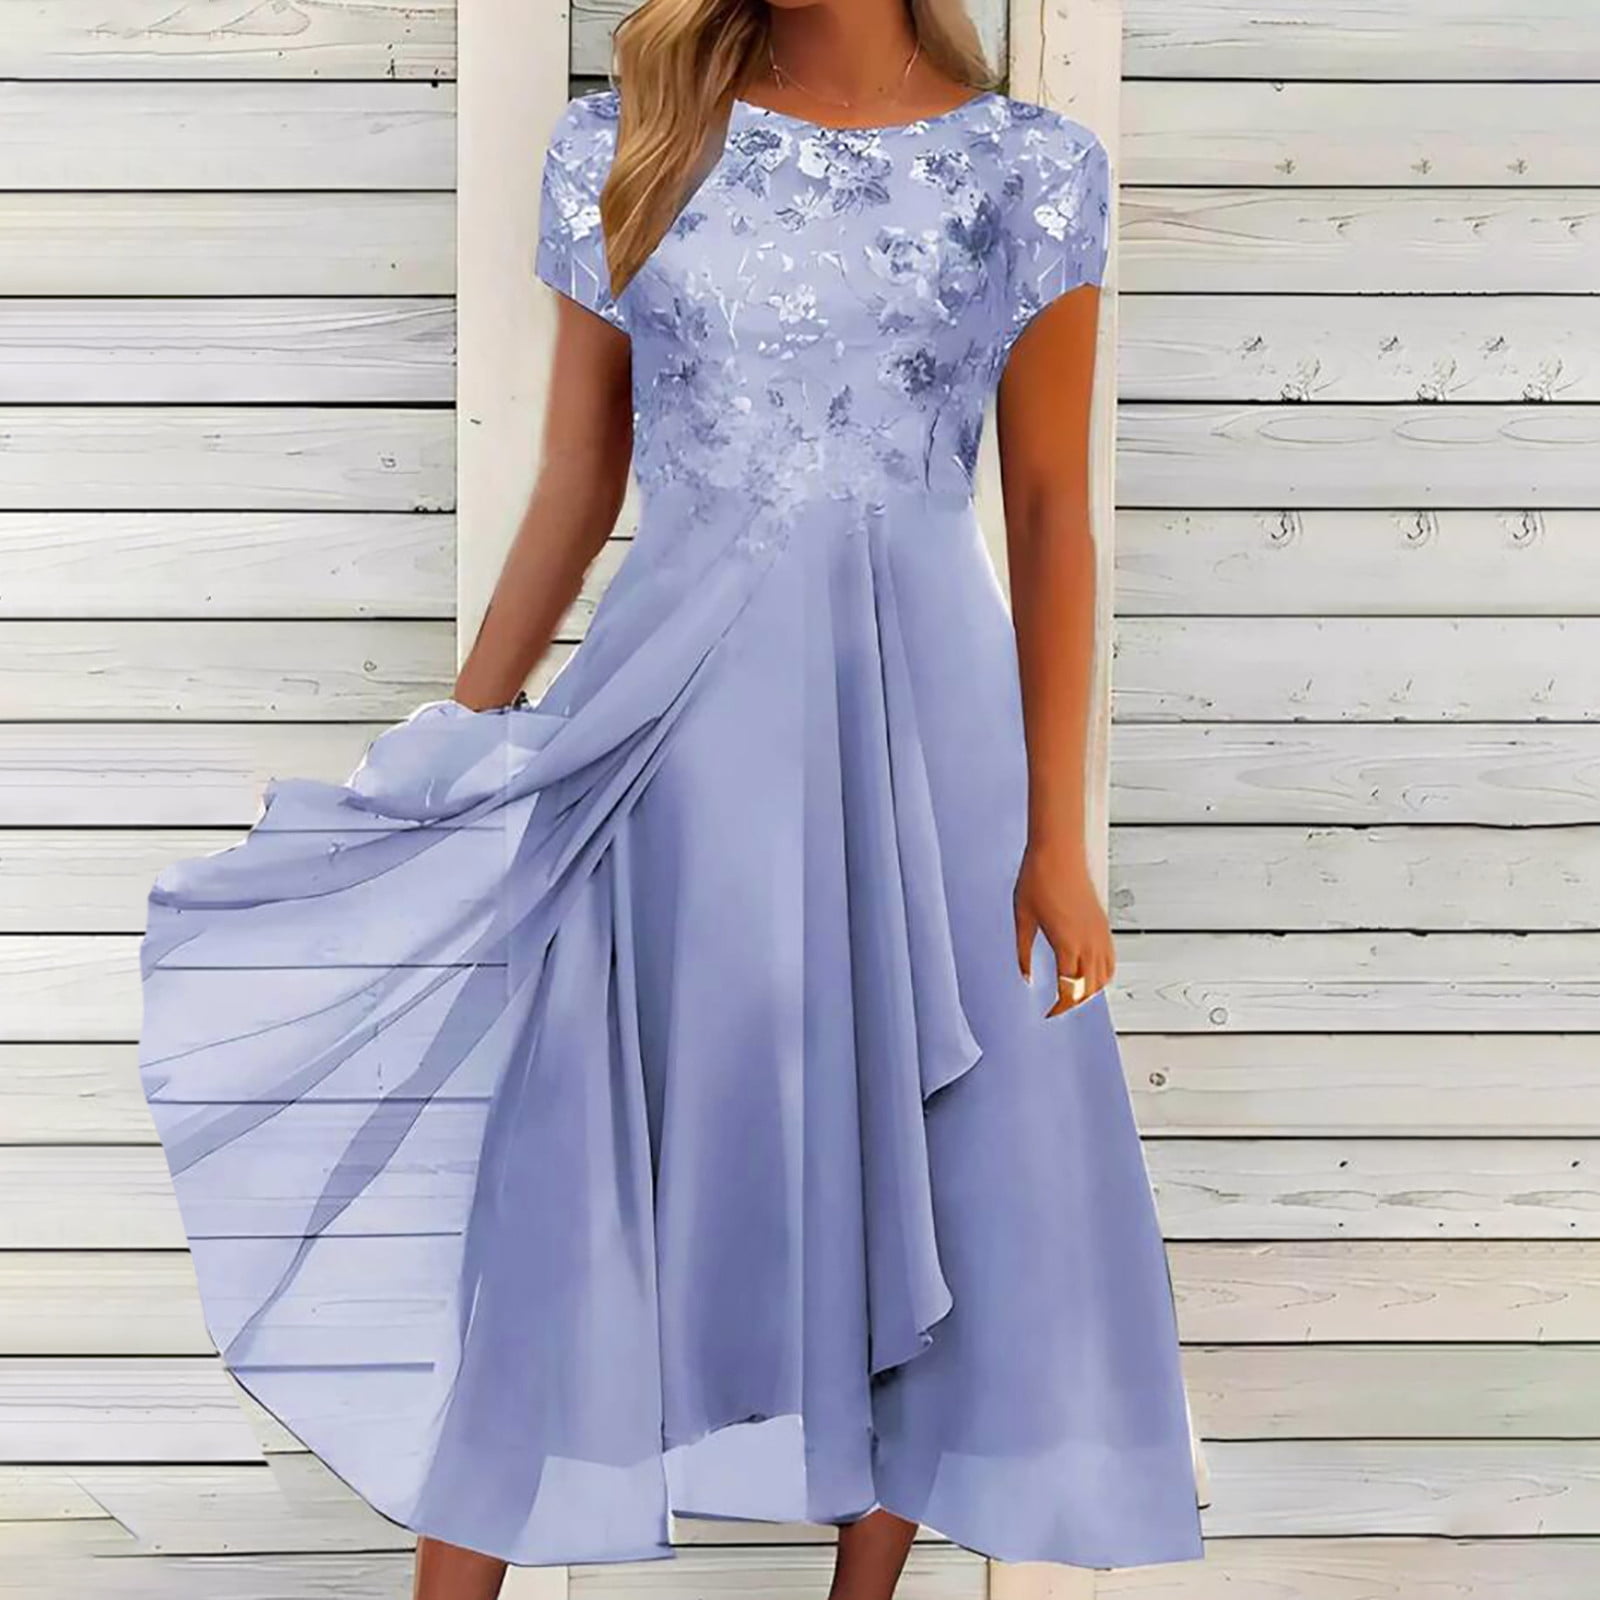 Women Floral Lace V Neck Short Sleeve Formal Chiffon Dress, Swing Cocktail  Party Midi Wedding Guest Dresses for Women 